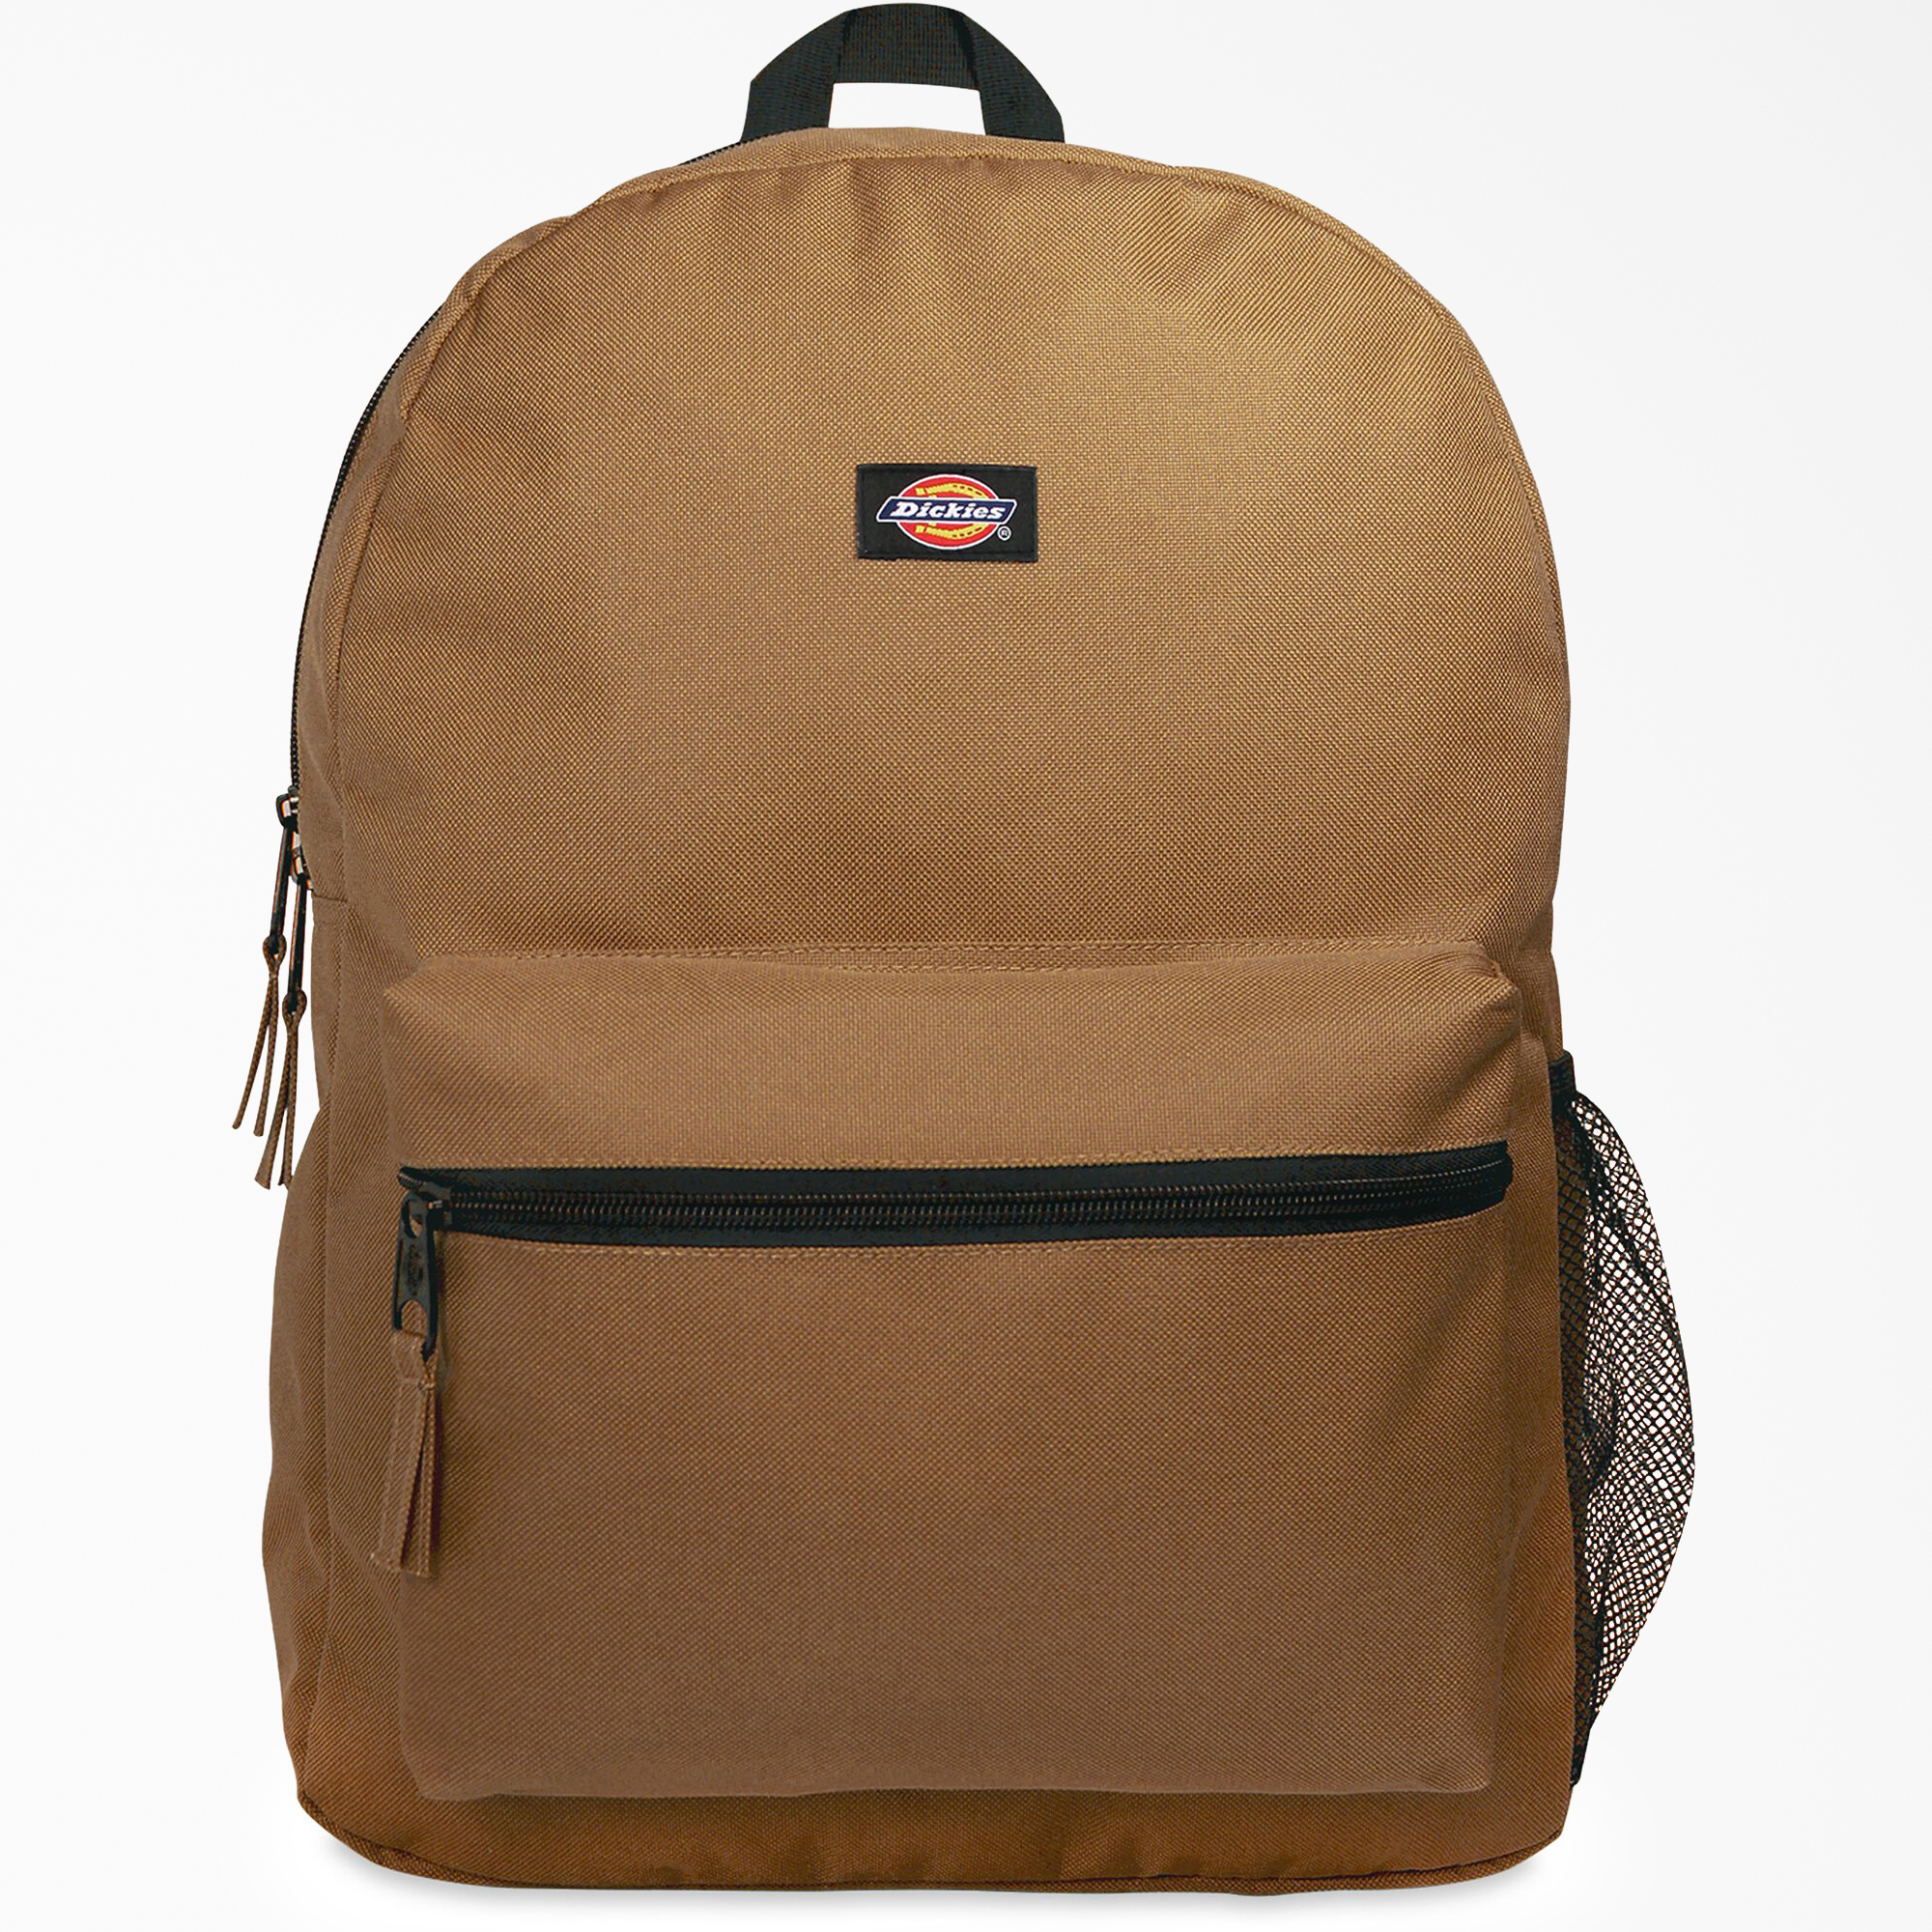 Student Backpack - Brown Duck (BD)